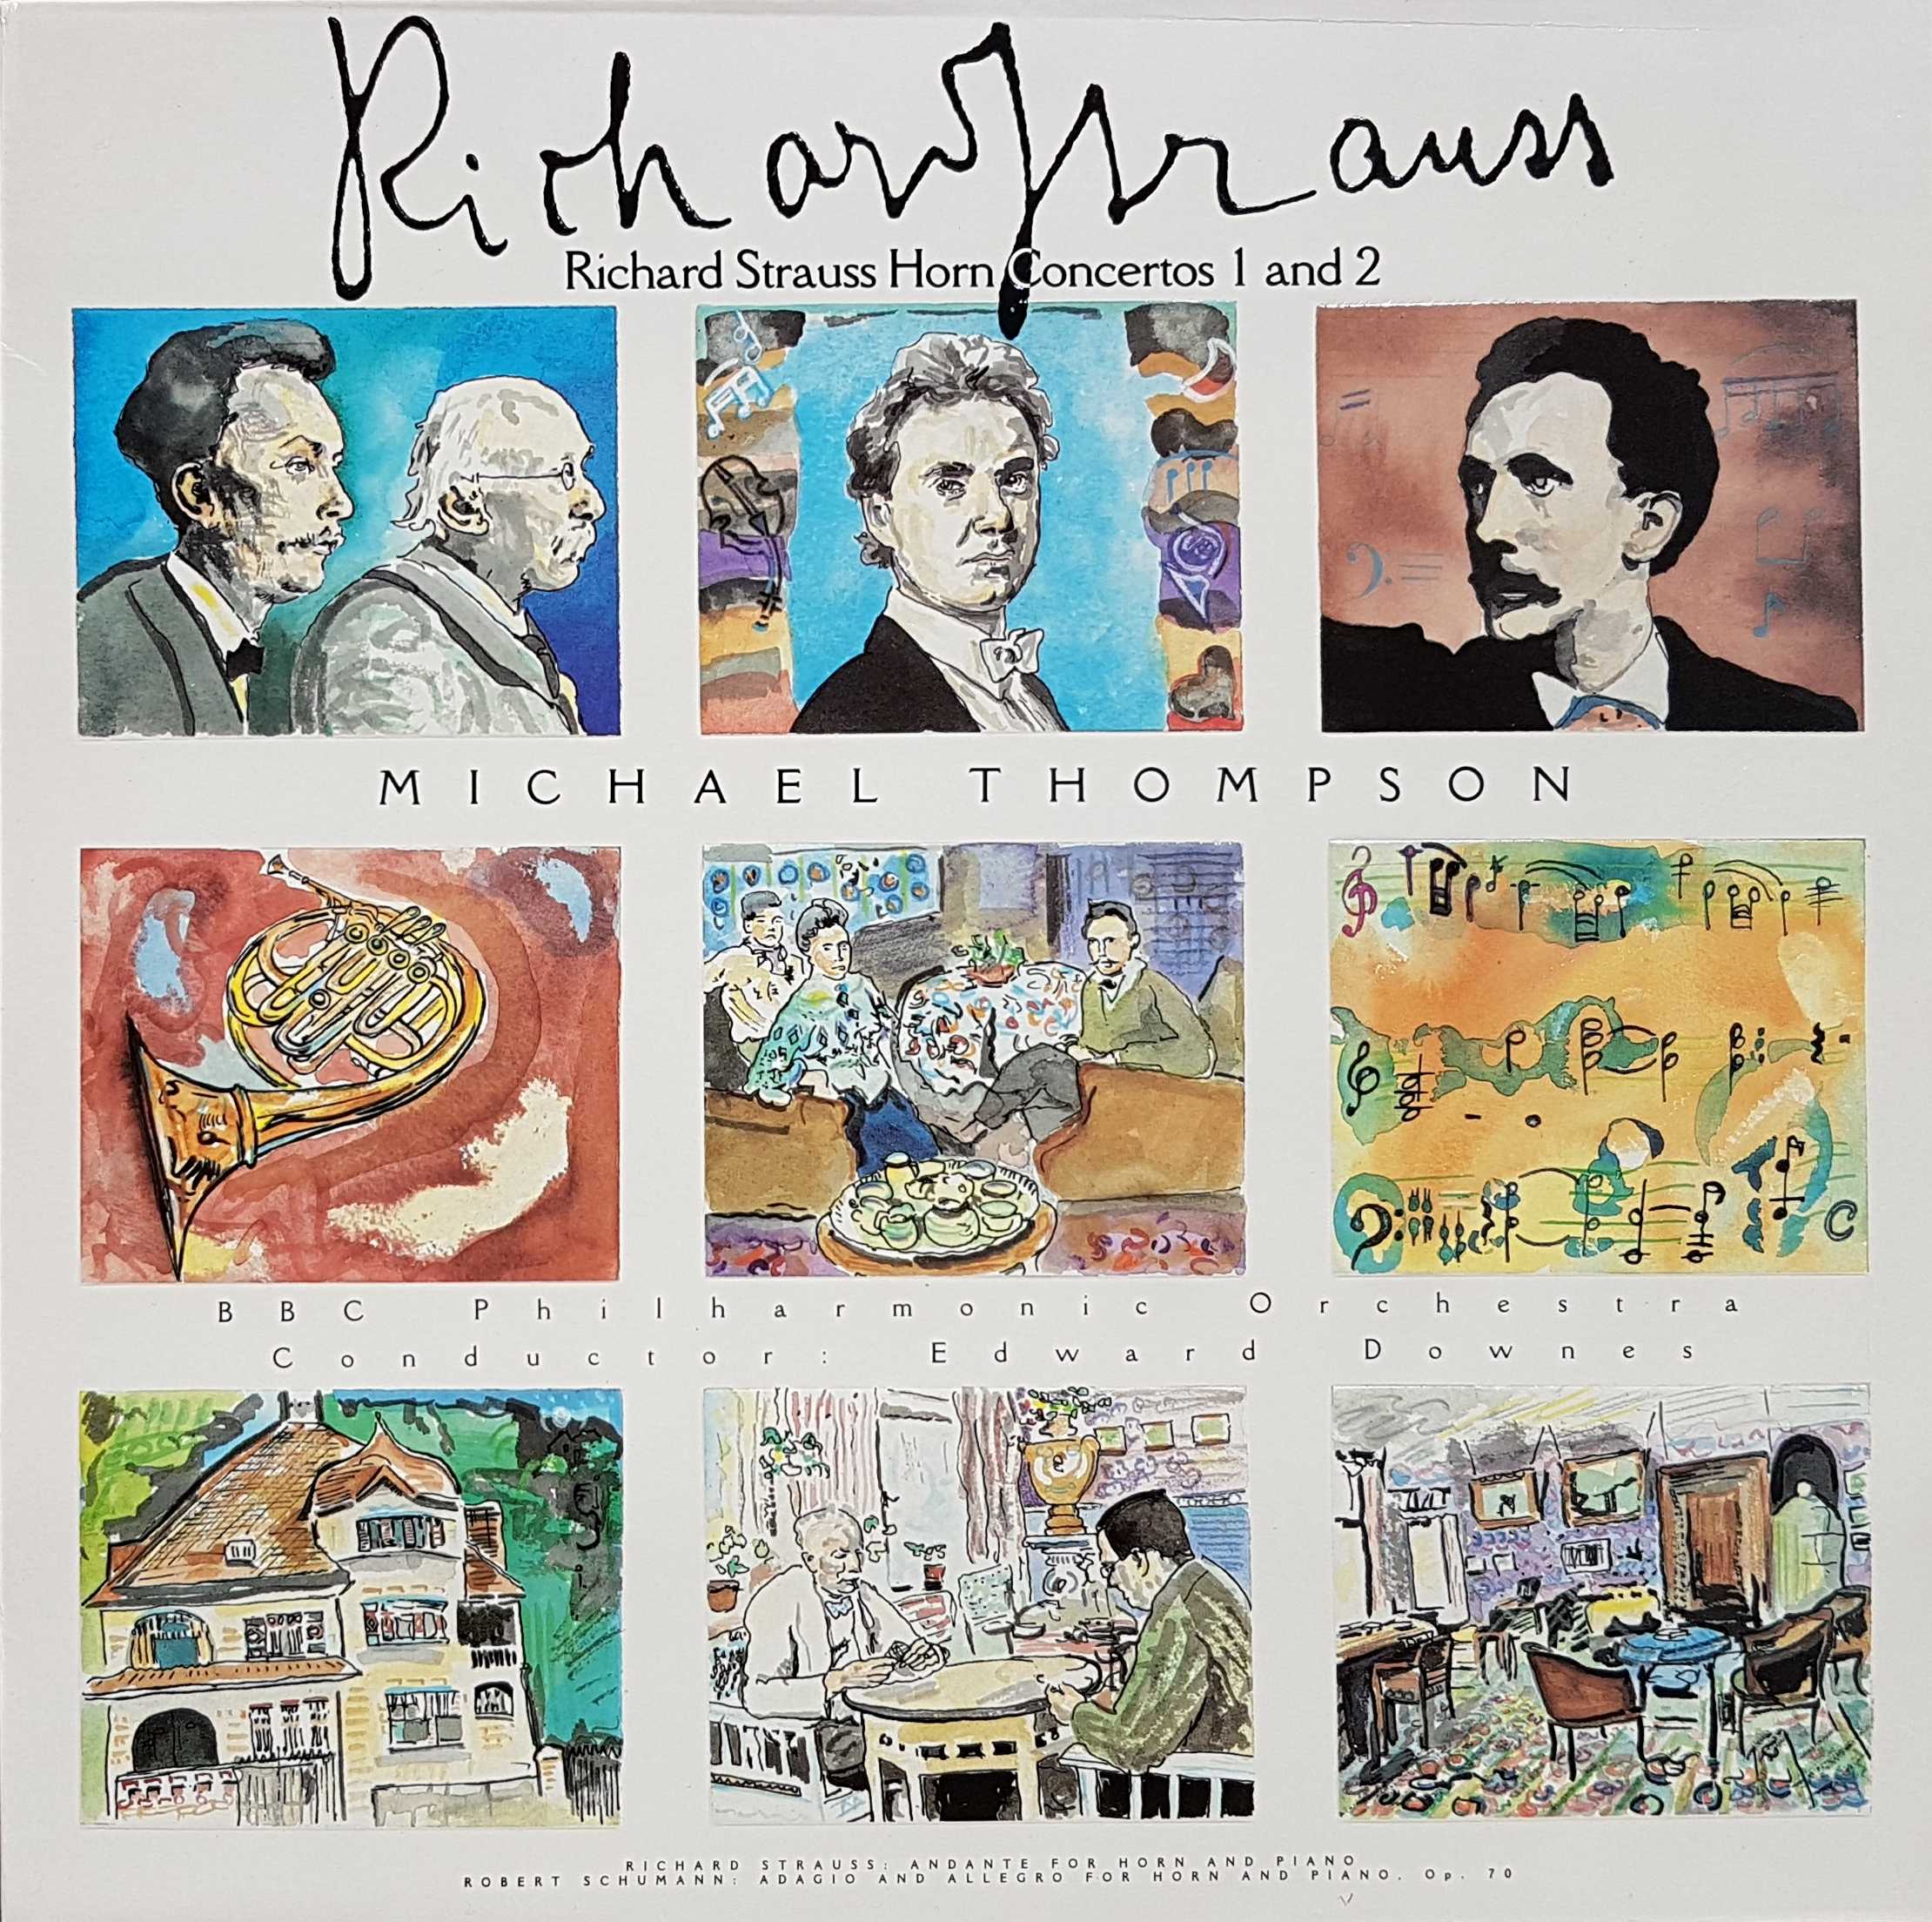 Picture of REN 641 Horn concertos by artist Richard Strauss from the BBC albums - Records and Tapes library